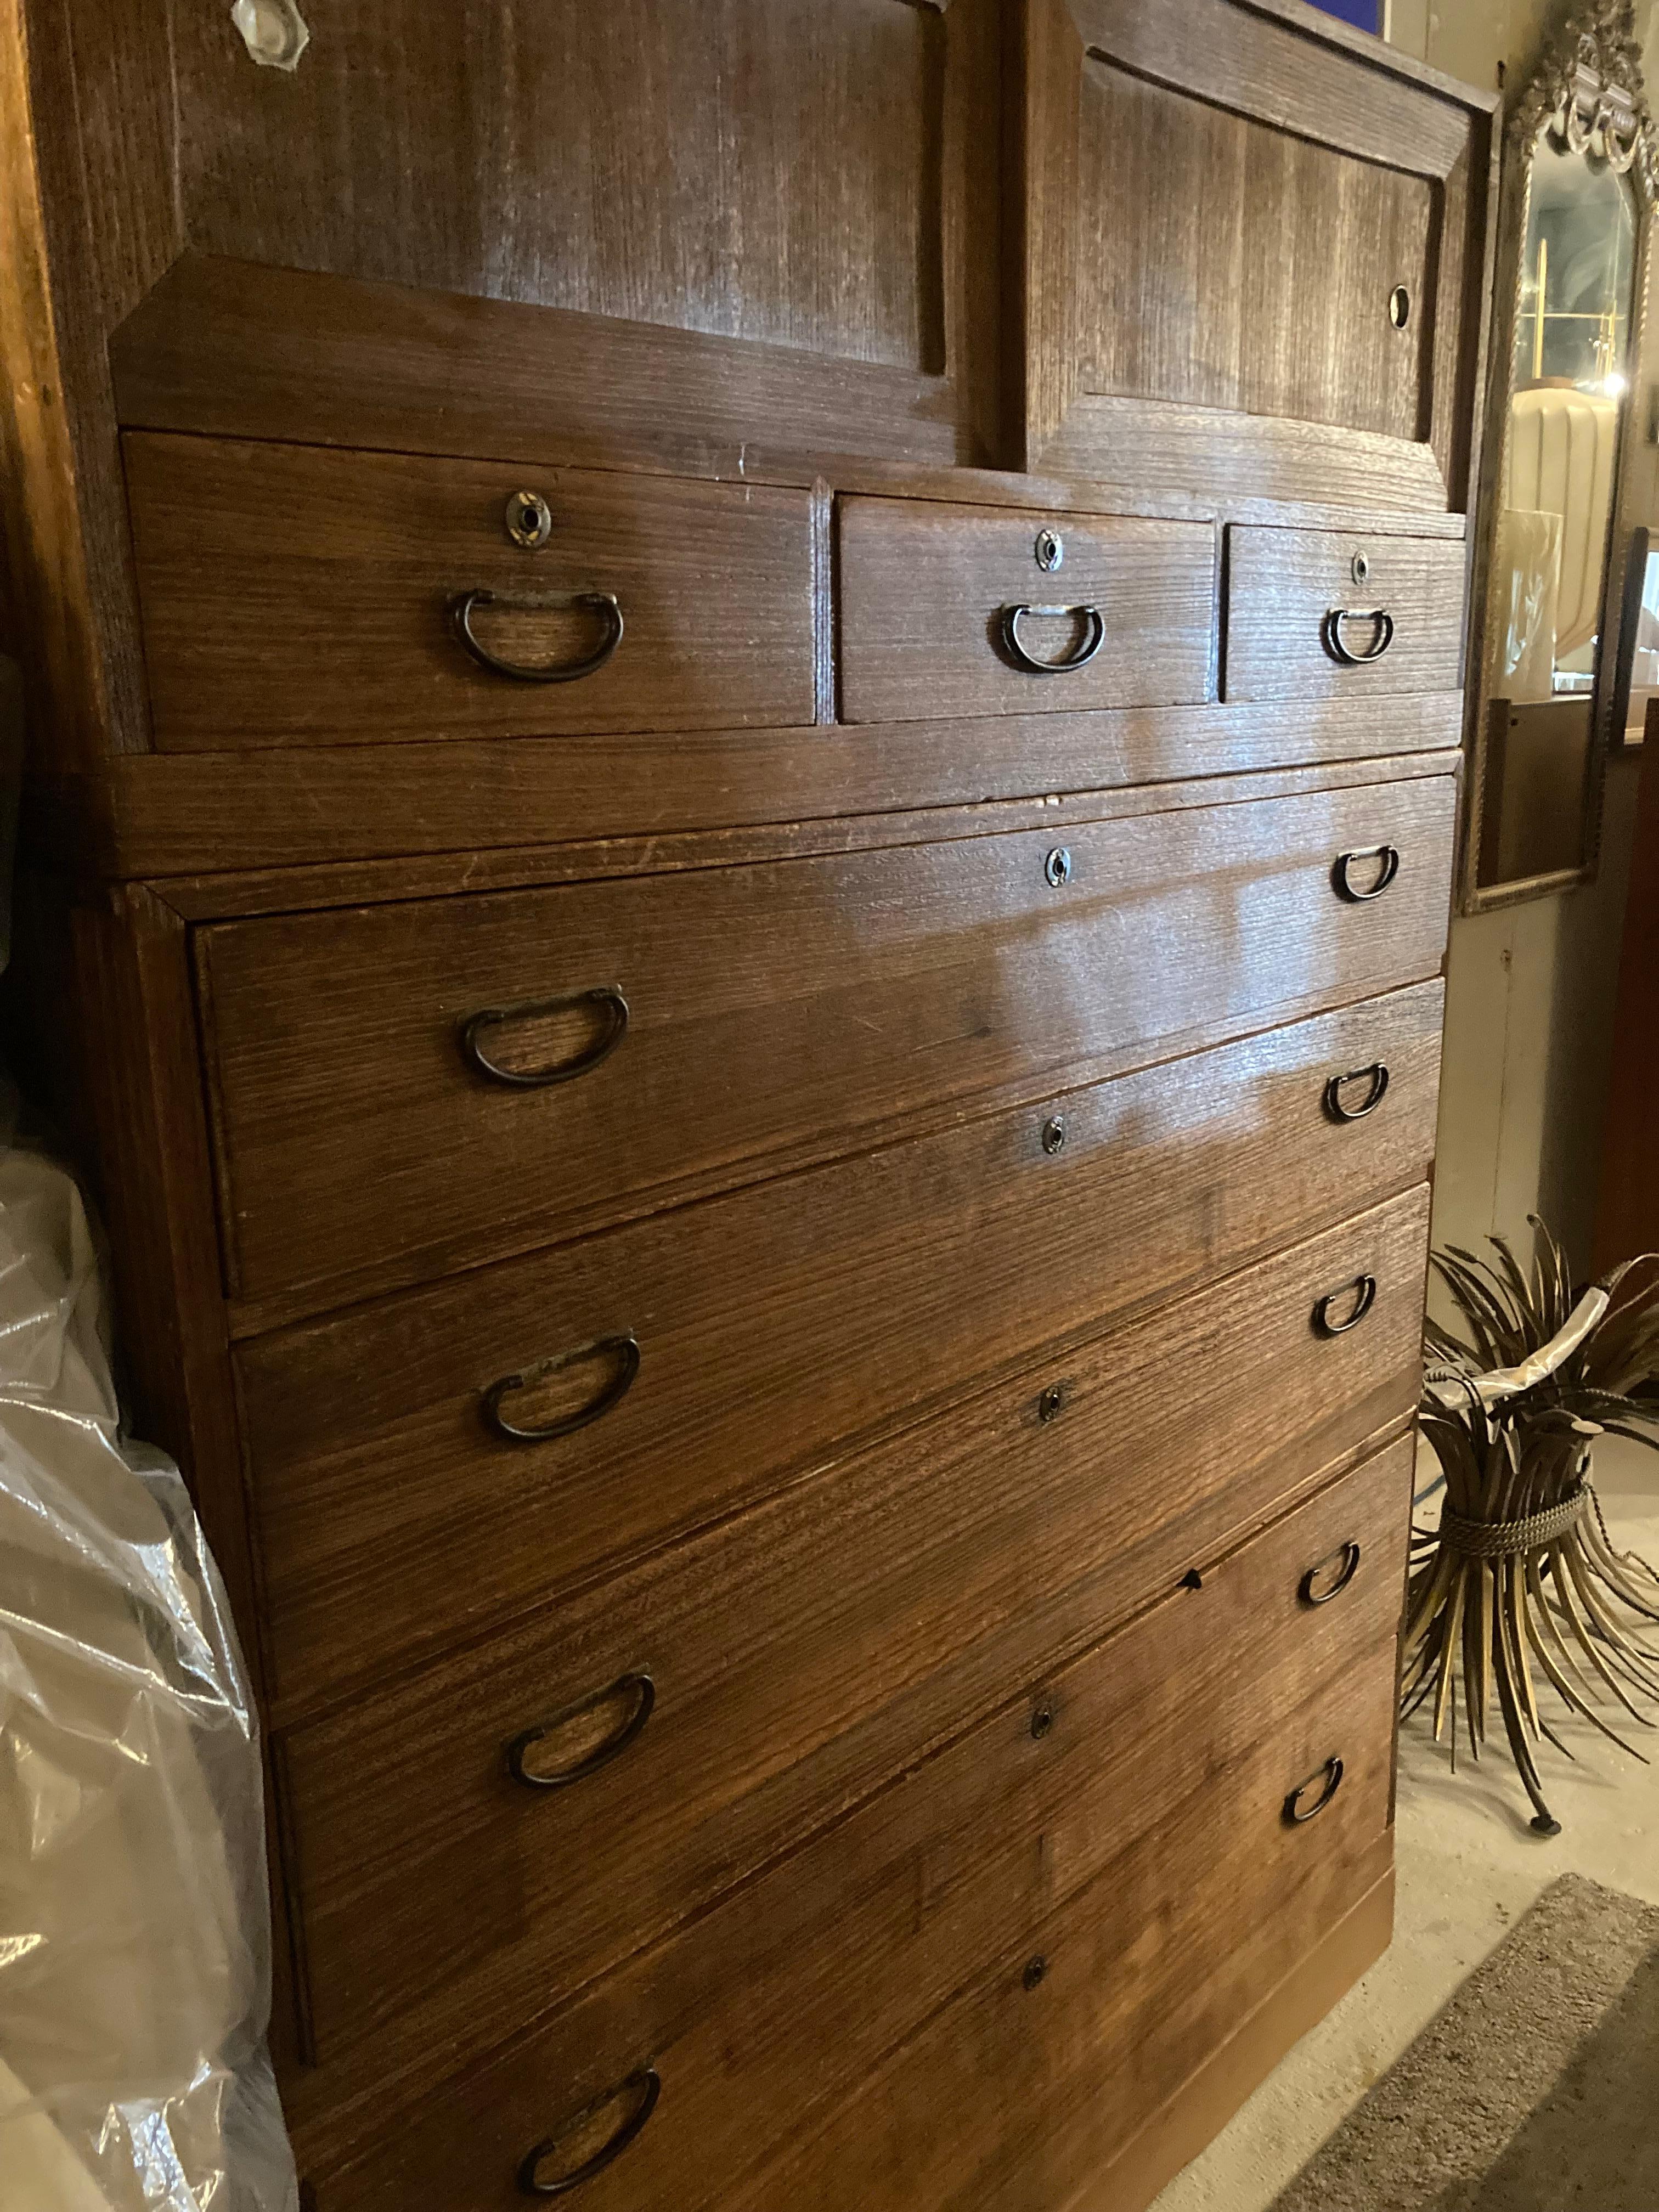 Versatile and elegant Japanese Kiriwood Isho Tansu chest. 

The ingenuity of Japanese joinery, usually made without nails or screws. These chest would be used to keep personal treasures, food, and or clothing. Each piece is stacked to create a